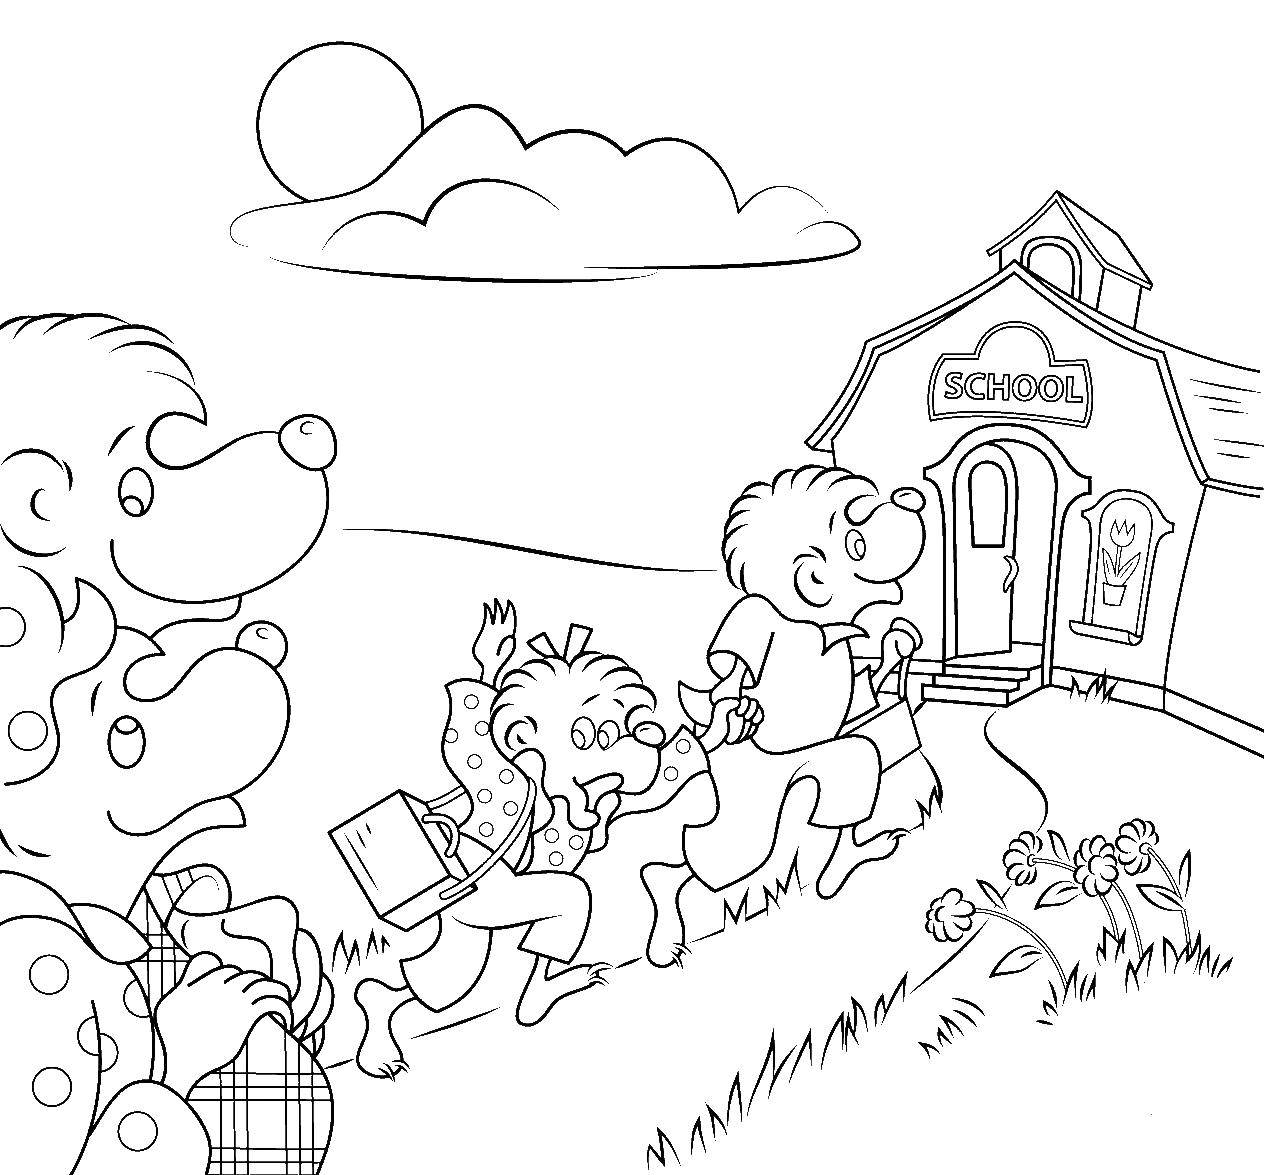 Coloring Hedgehogs go to school. Category school. Tags:  School, class, lesson, children.